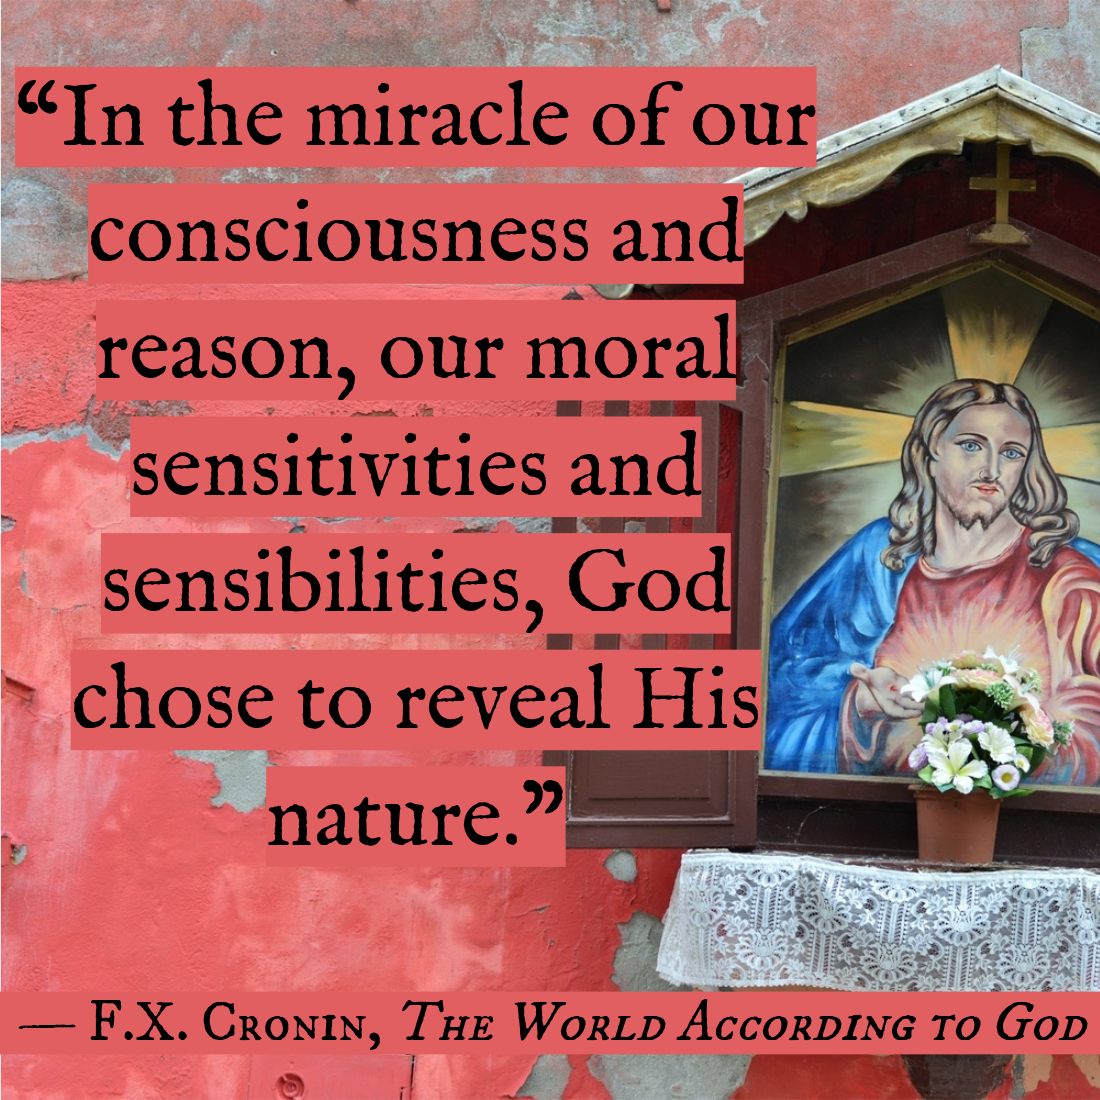 “In the miracle of our consciousness and reason, our moral sensitivities and sensibilities, God chose to reveal His nature.” —FX Cronin, The World According to God